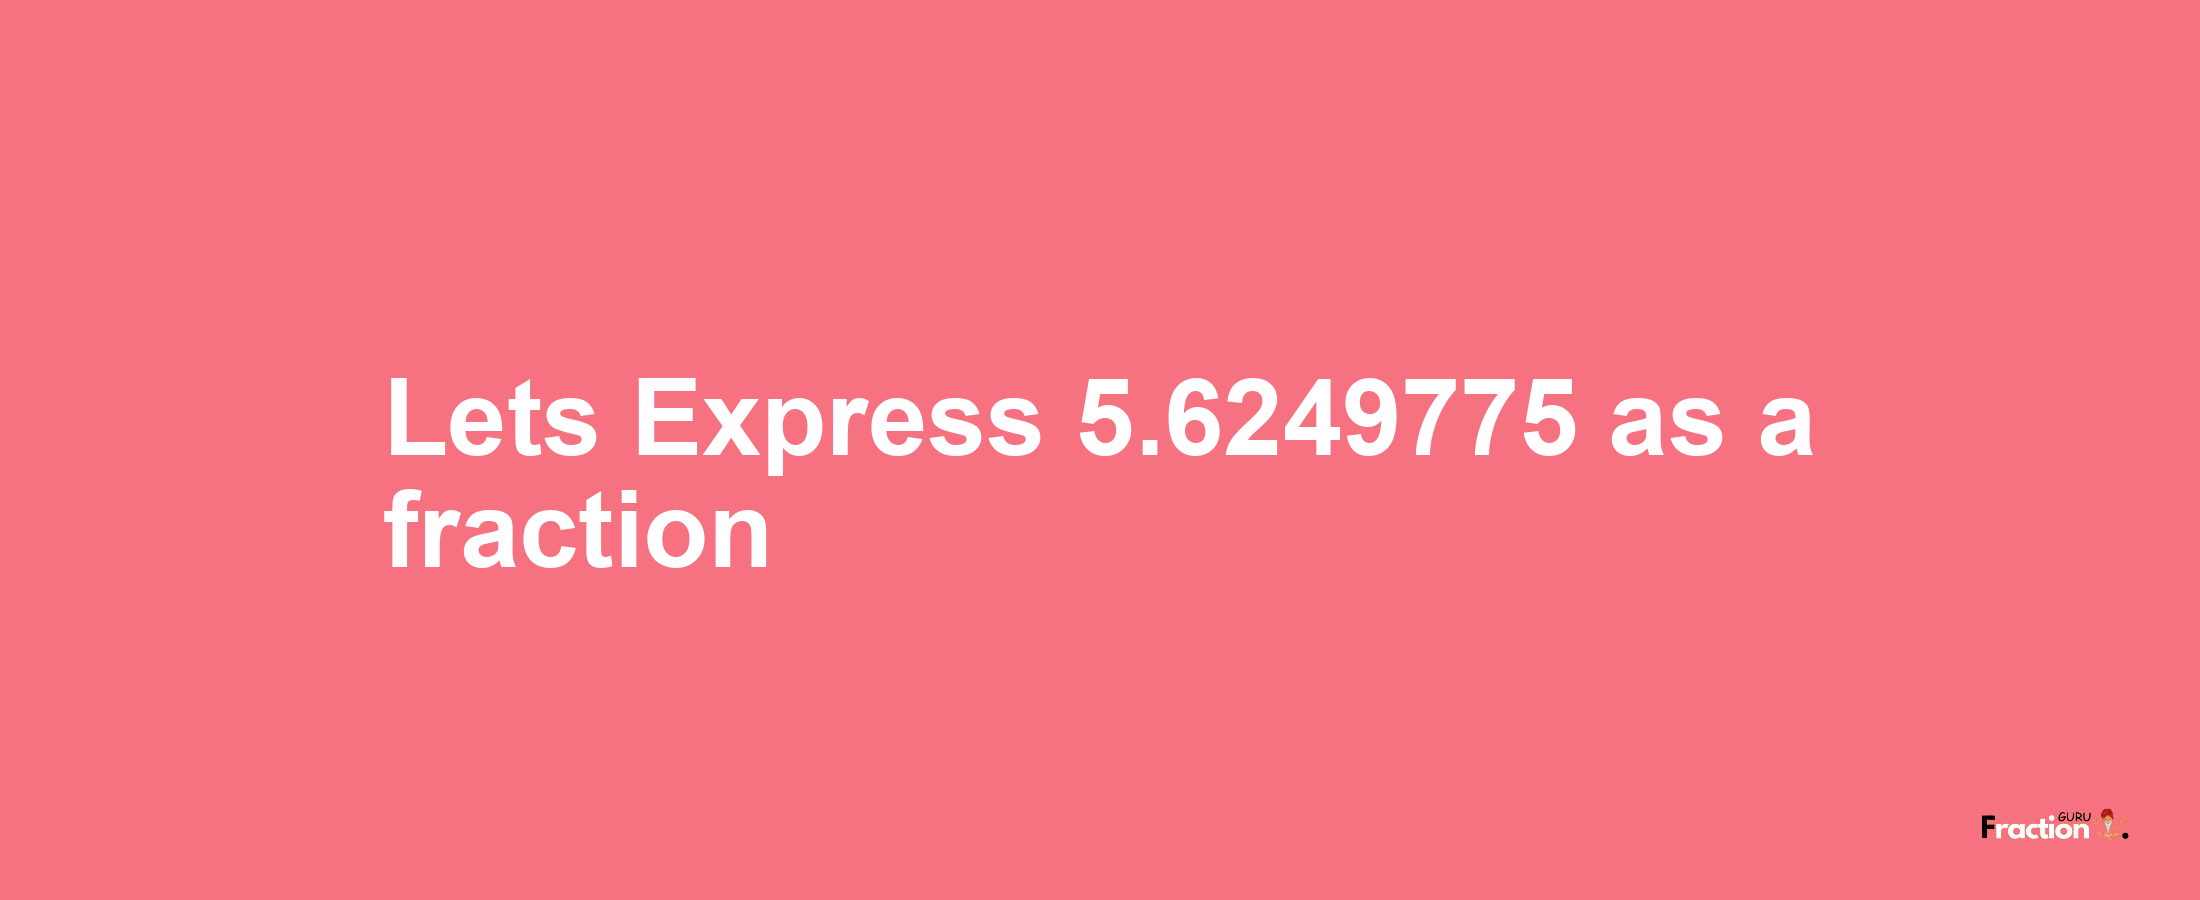 Lets Express 5.6249775 as afraction